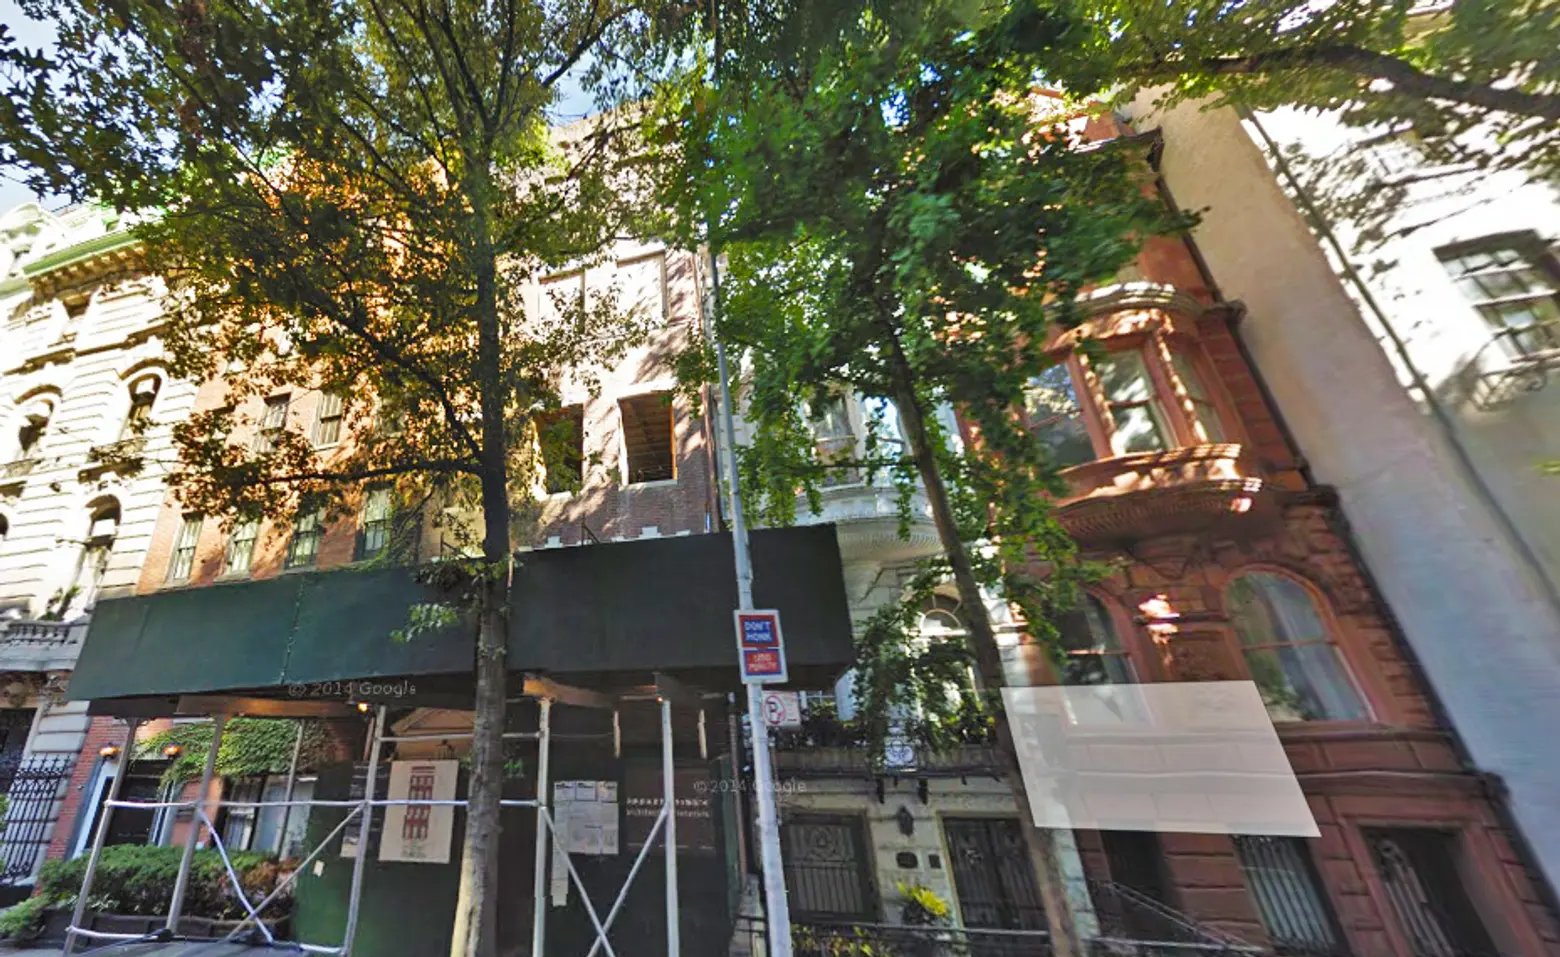 Russian Billionaire Roman Abramovich Buys Up Three UES Townhouses to Build a Makeshift Mansion